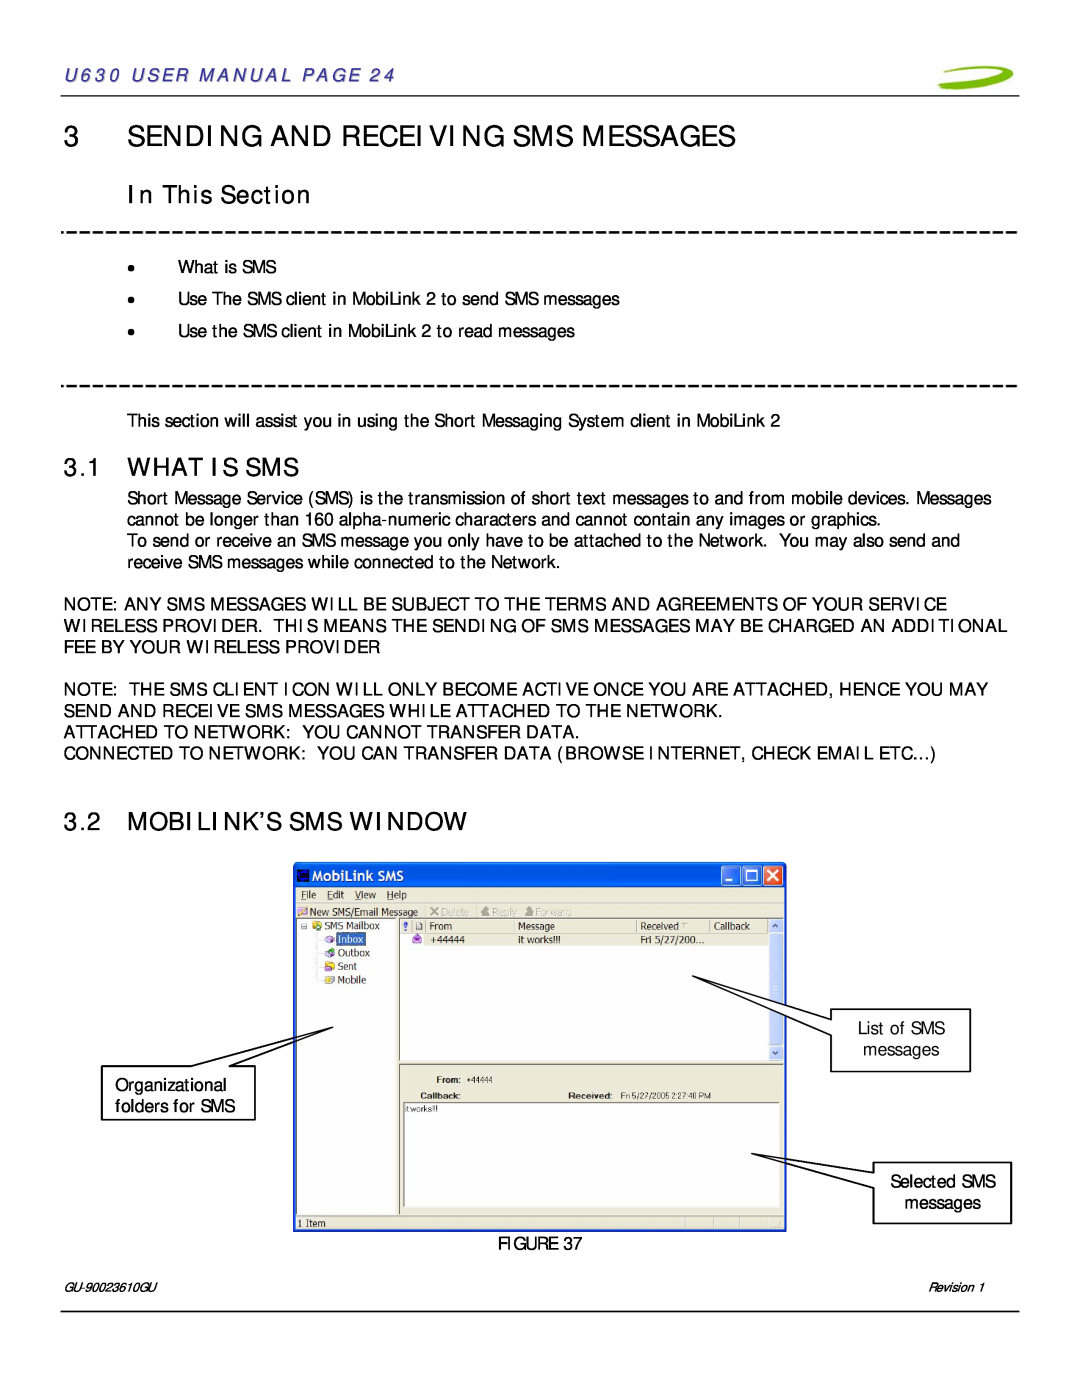 InFocus U630 user manual Sending And Receiving Sms Messages, What Is Sms, Mobilink’S Sms Window, In This Section 